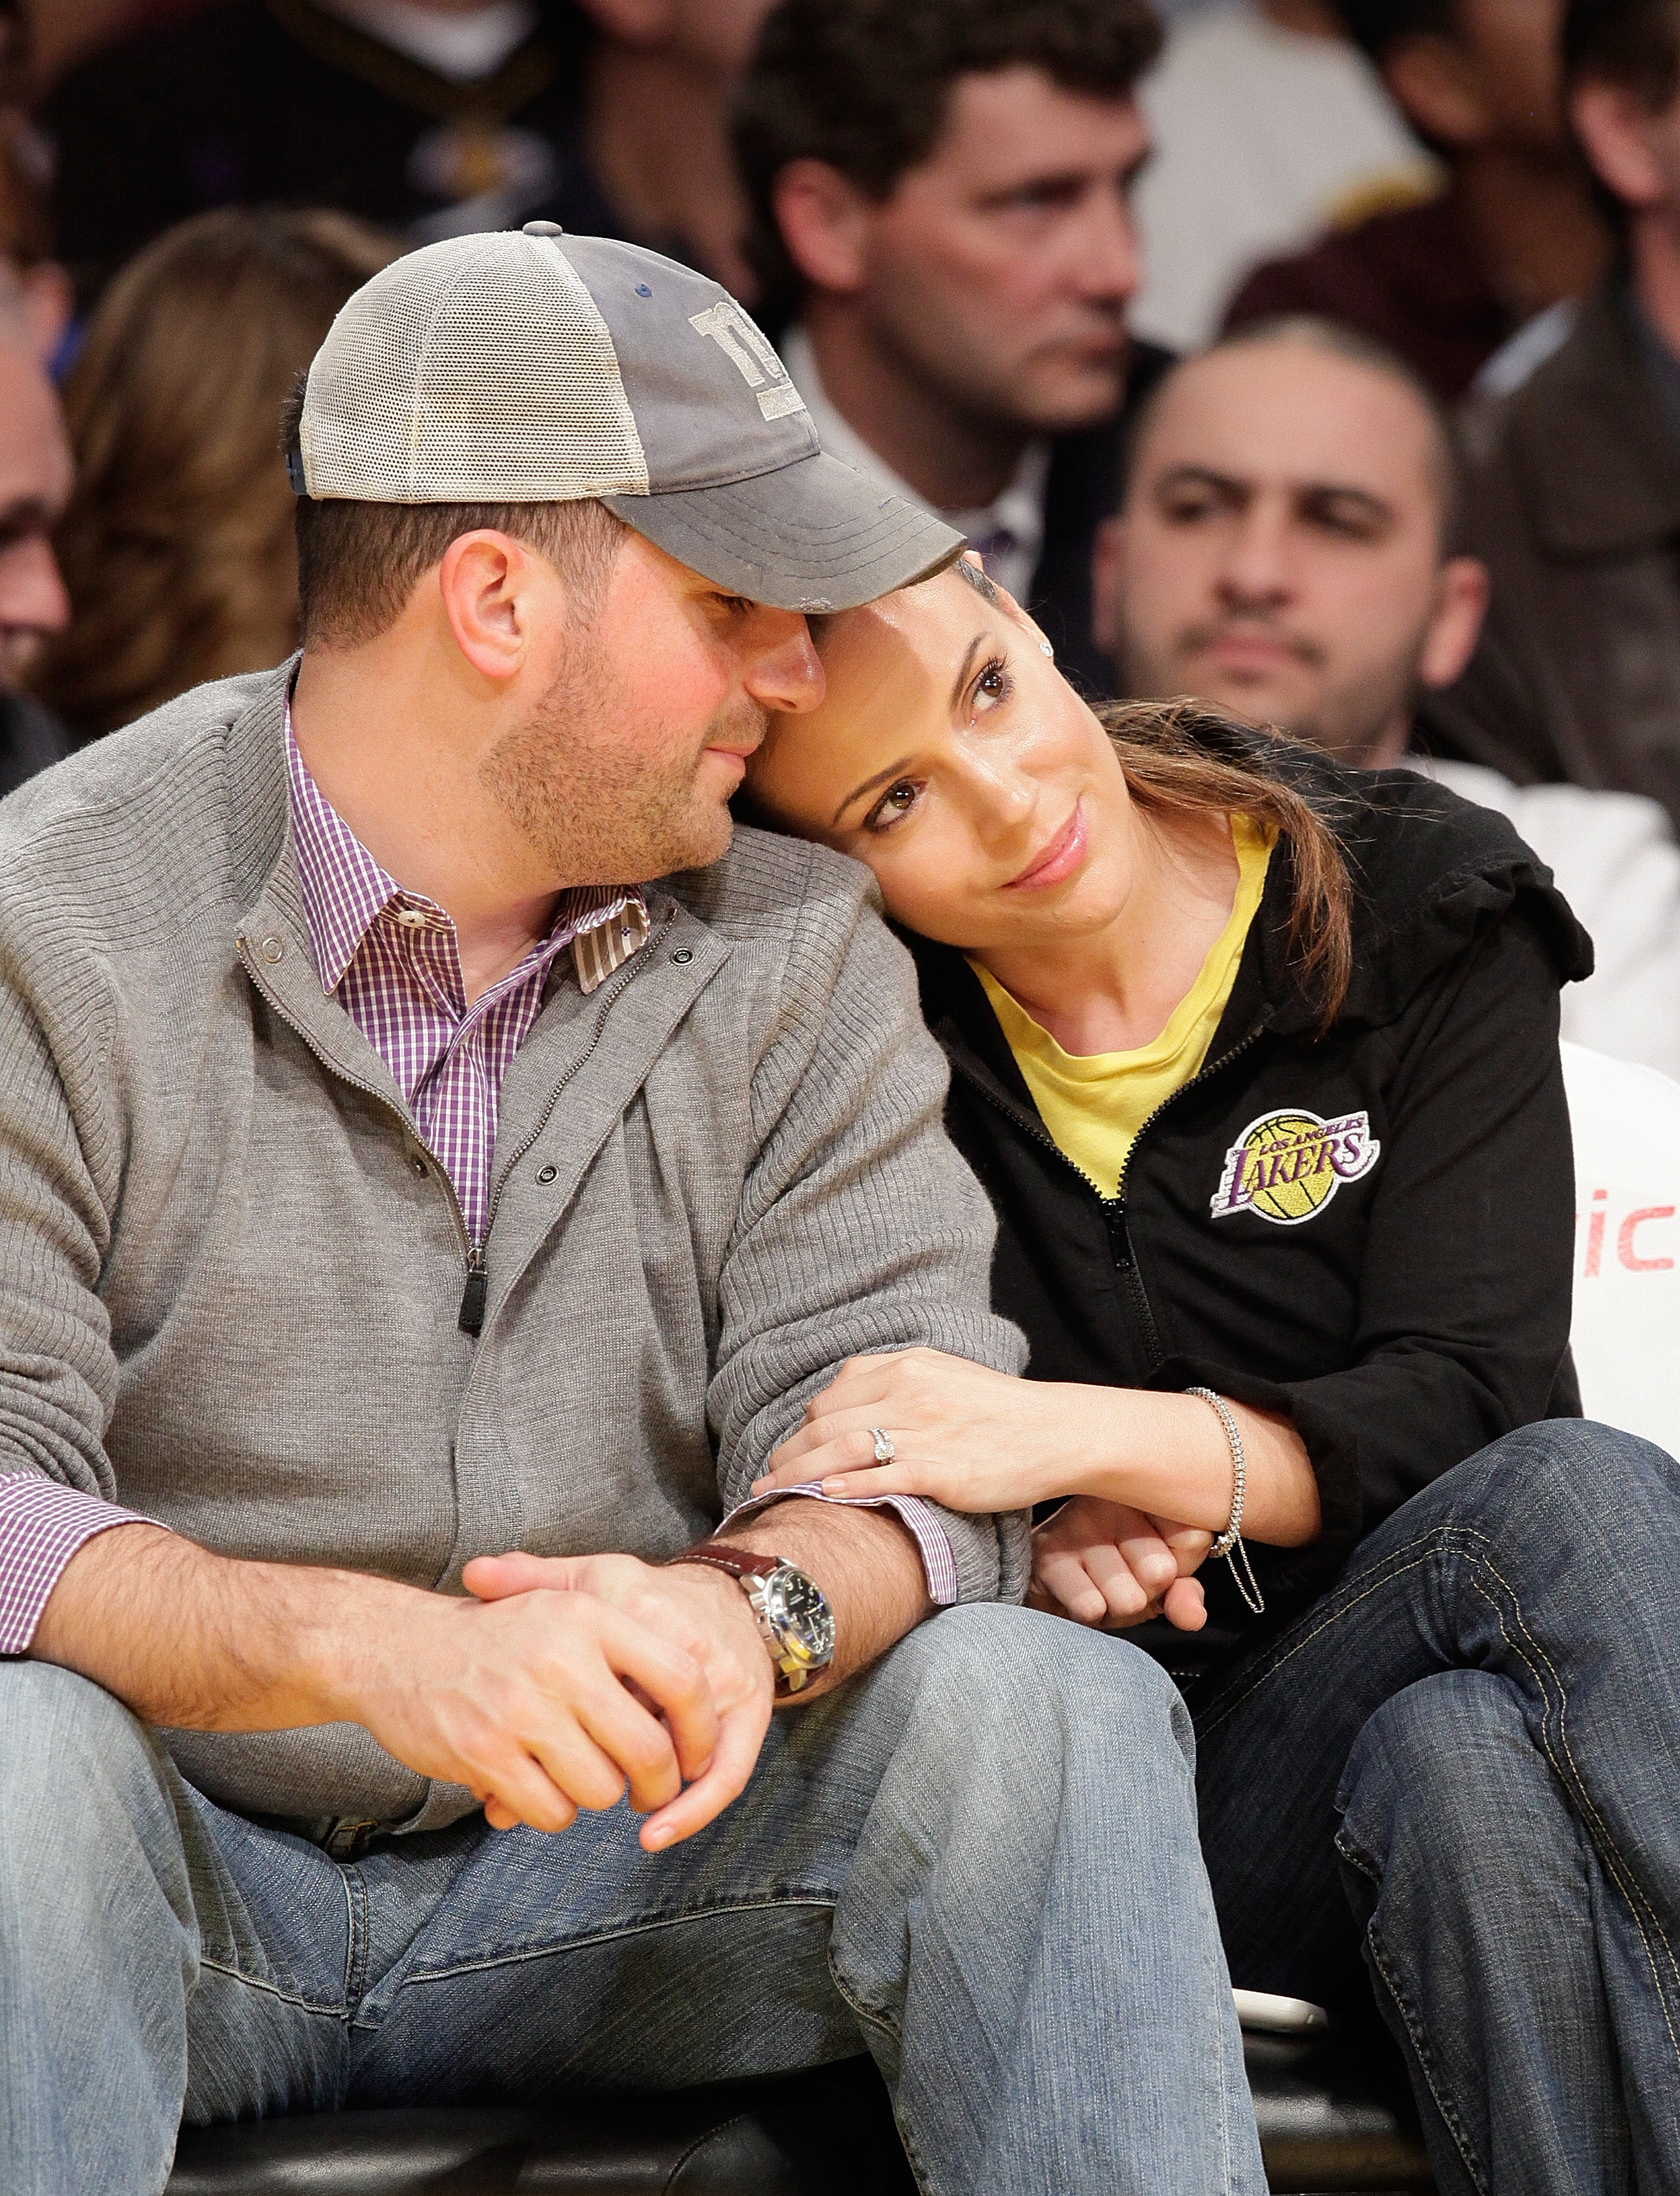 David Bugliari and Alyssa Milano at a basketball game at Staples Center on February 26, 2010 in Los Angeles, California | Source: Getty Images